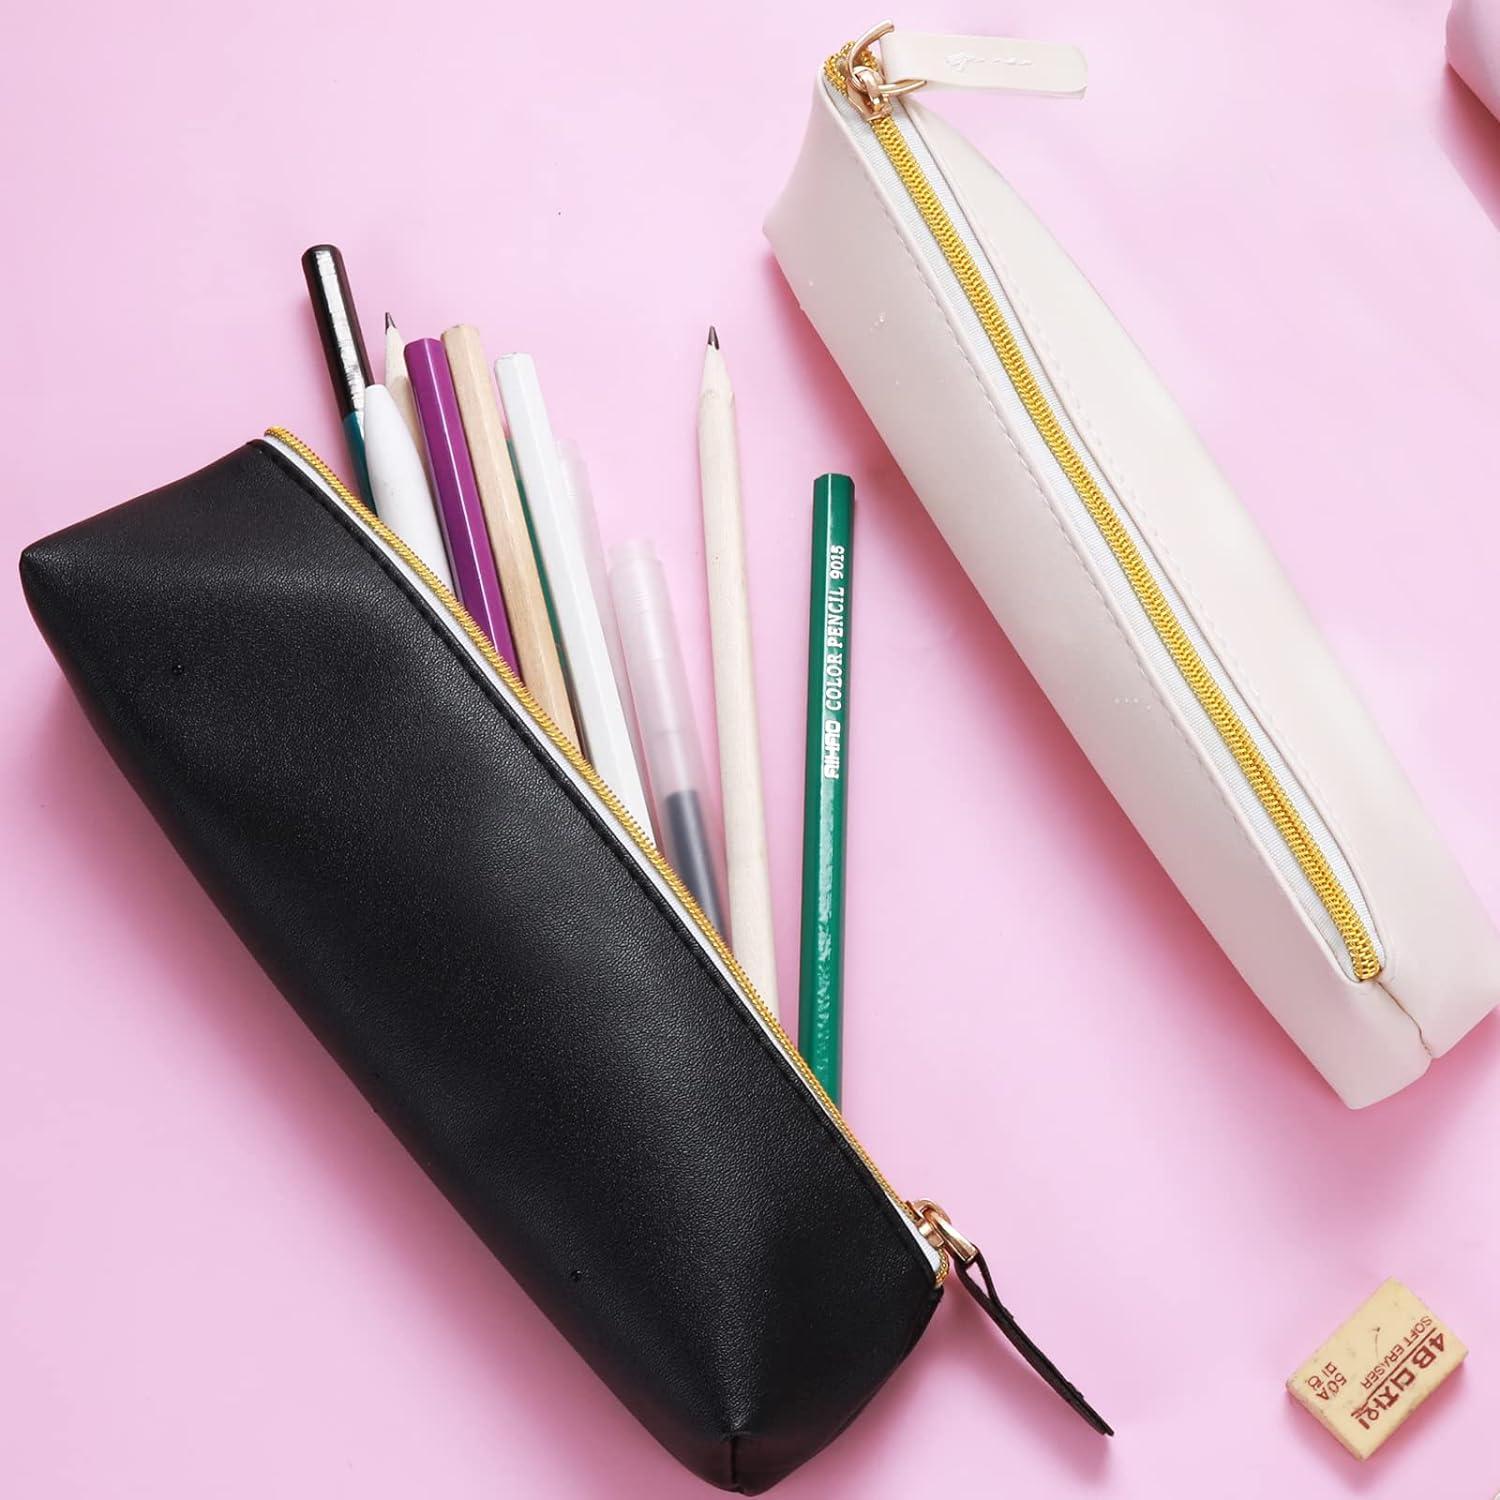 Leather pencil case, Pen bag, Small pencil case for adults, Pen, Pencil &  Marker Cases, leather Mini pencil pouch with zipper - green 